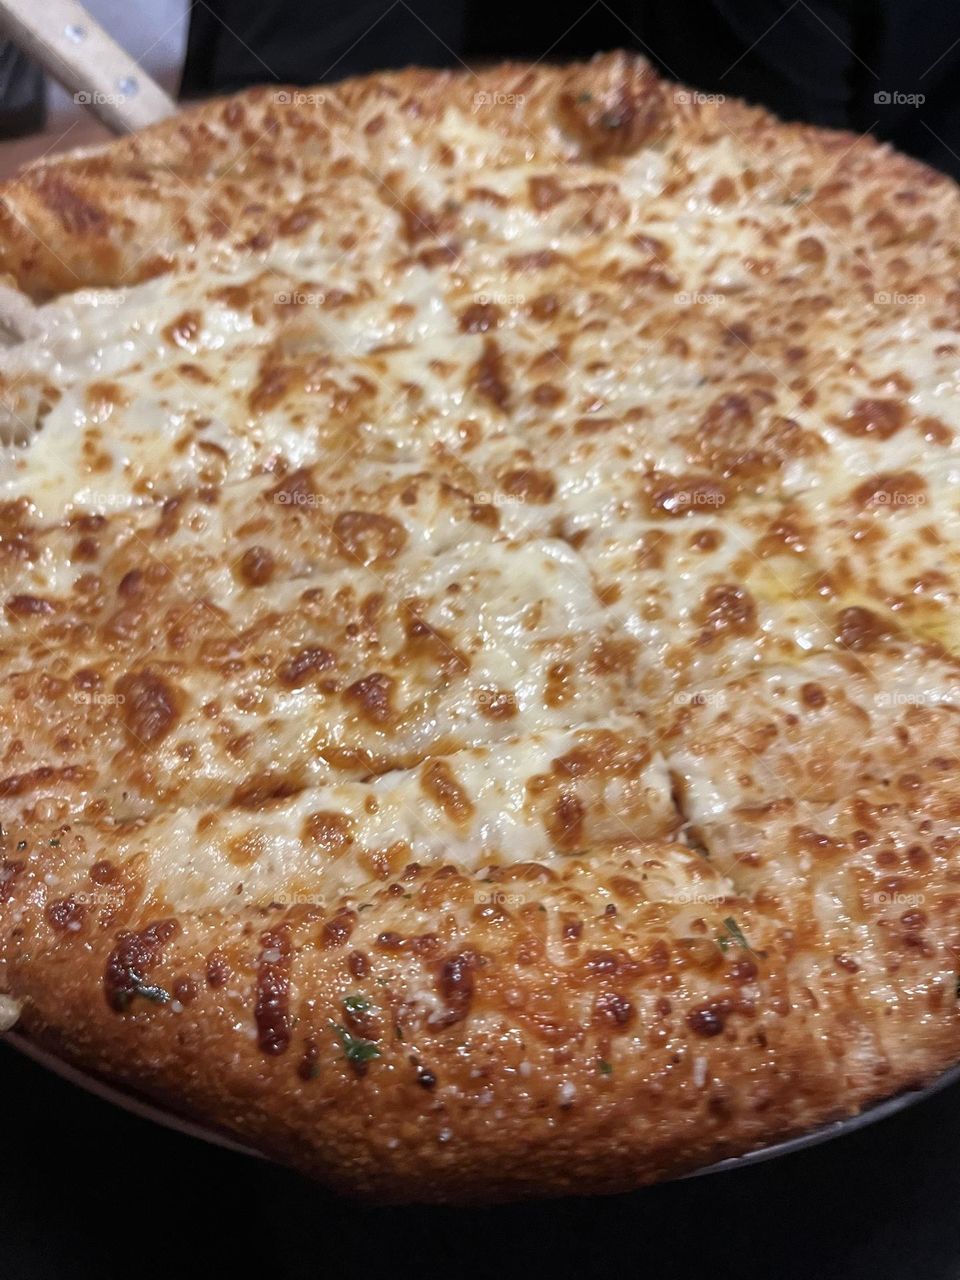 Bubbly oozing Cheese bread with crunchy crust 